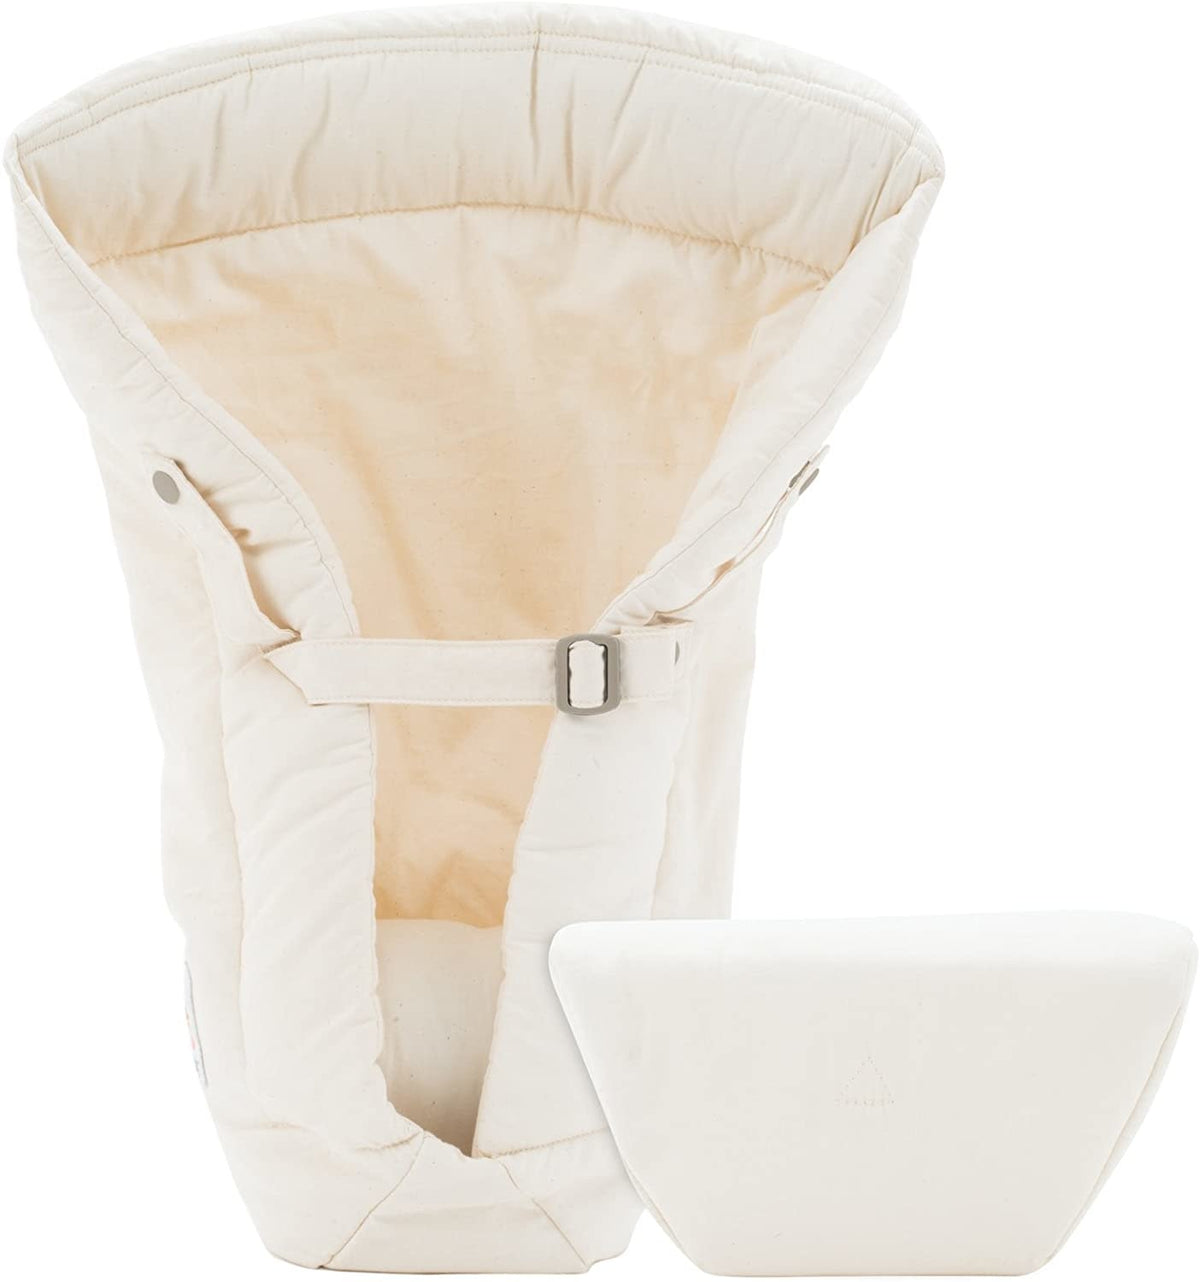 Ergobaby Baby Carrier Organic Cotton Infant Insert (Natural)